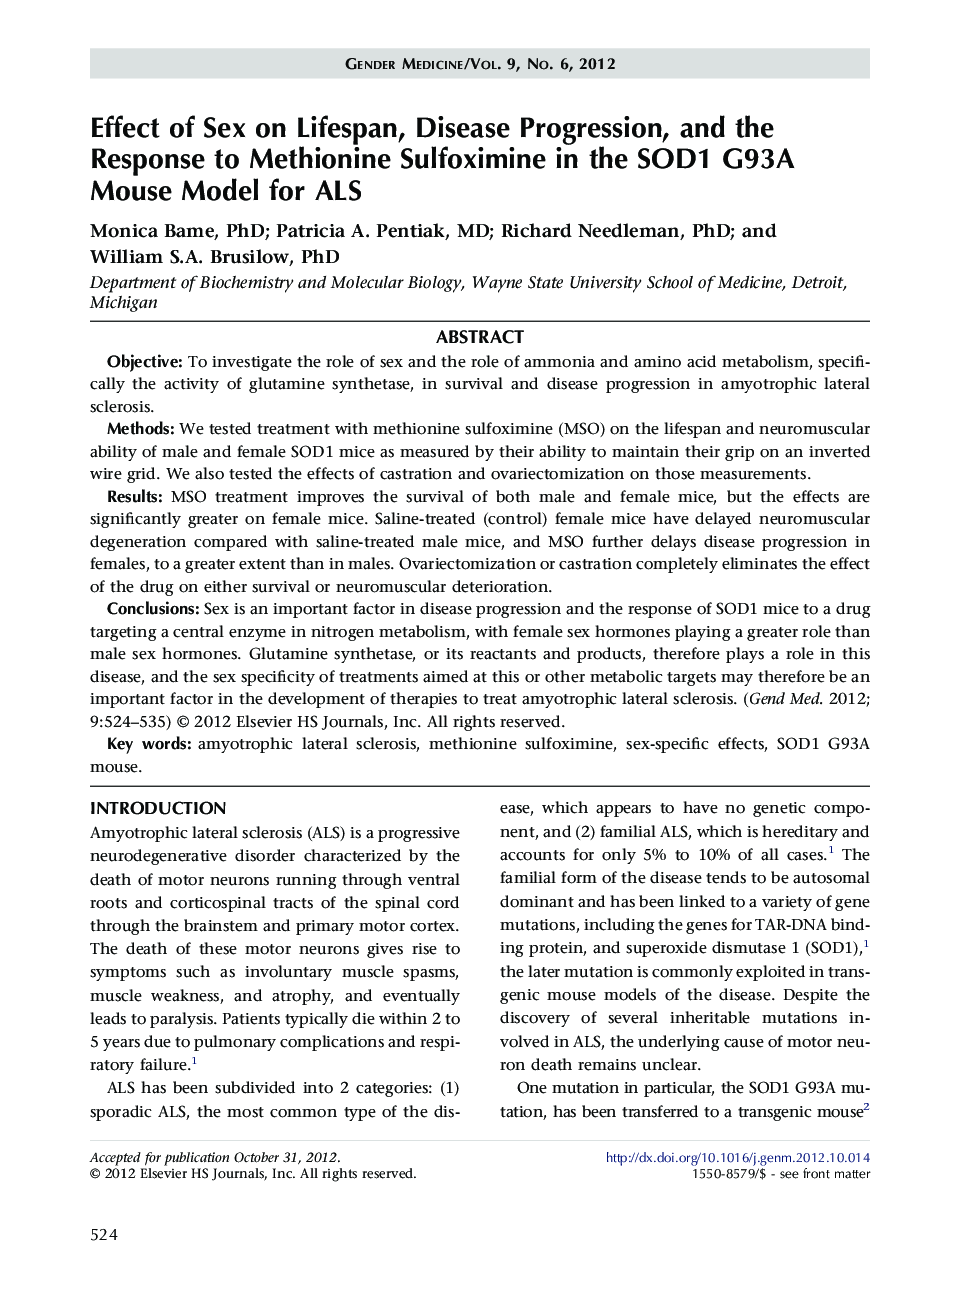 Effect of Sex on Lifespan, Disease Progression, and the Response to Methionine Sulfoximine in the SOD1 G93A Mouse Model for ALS